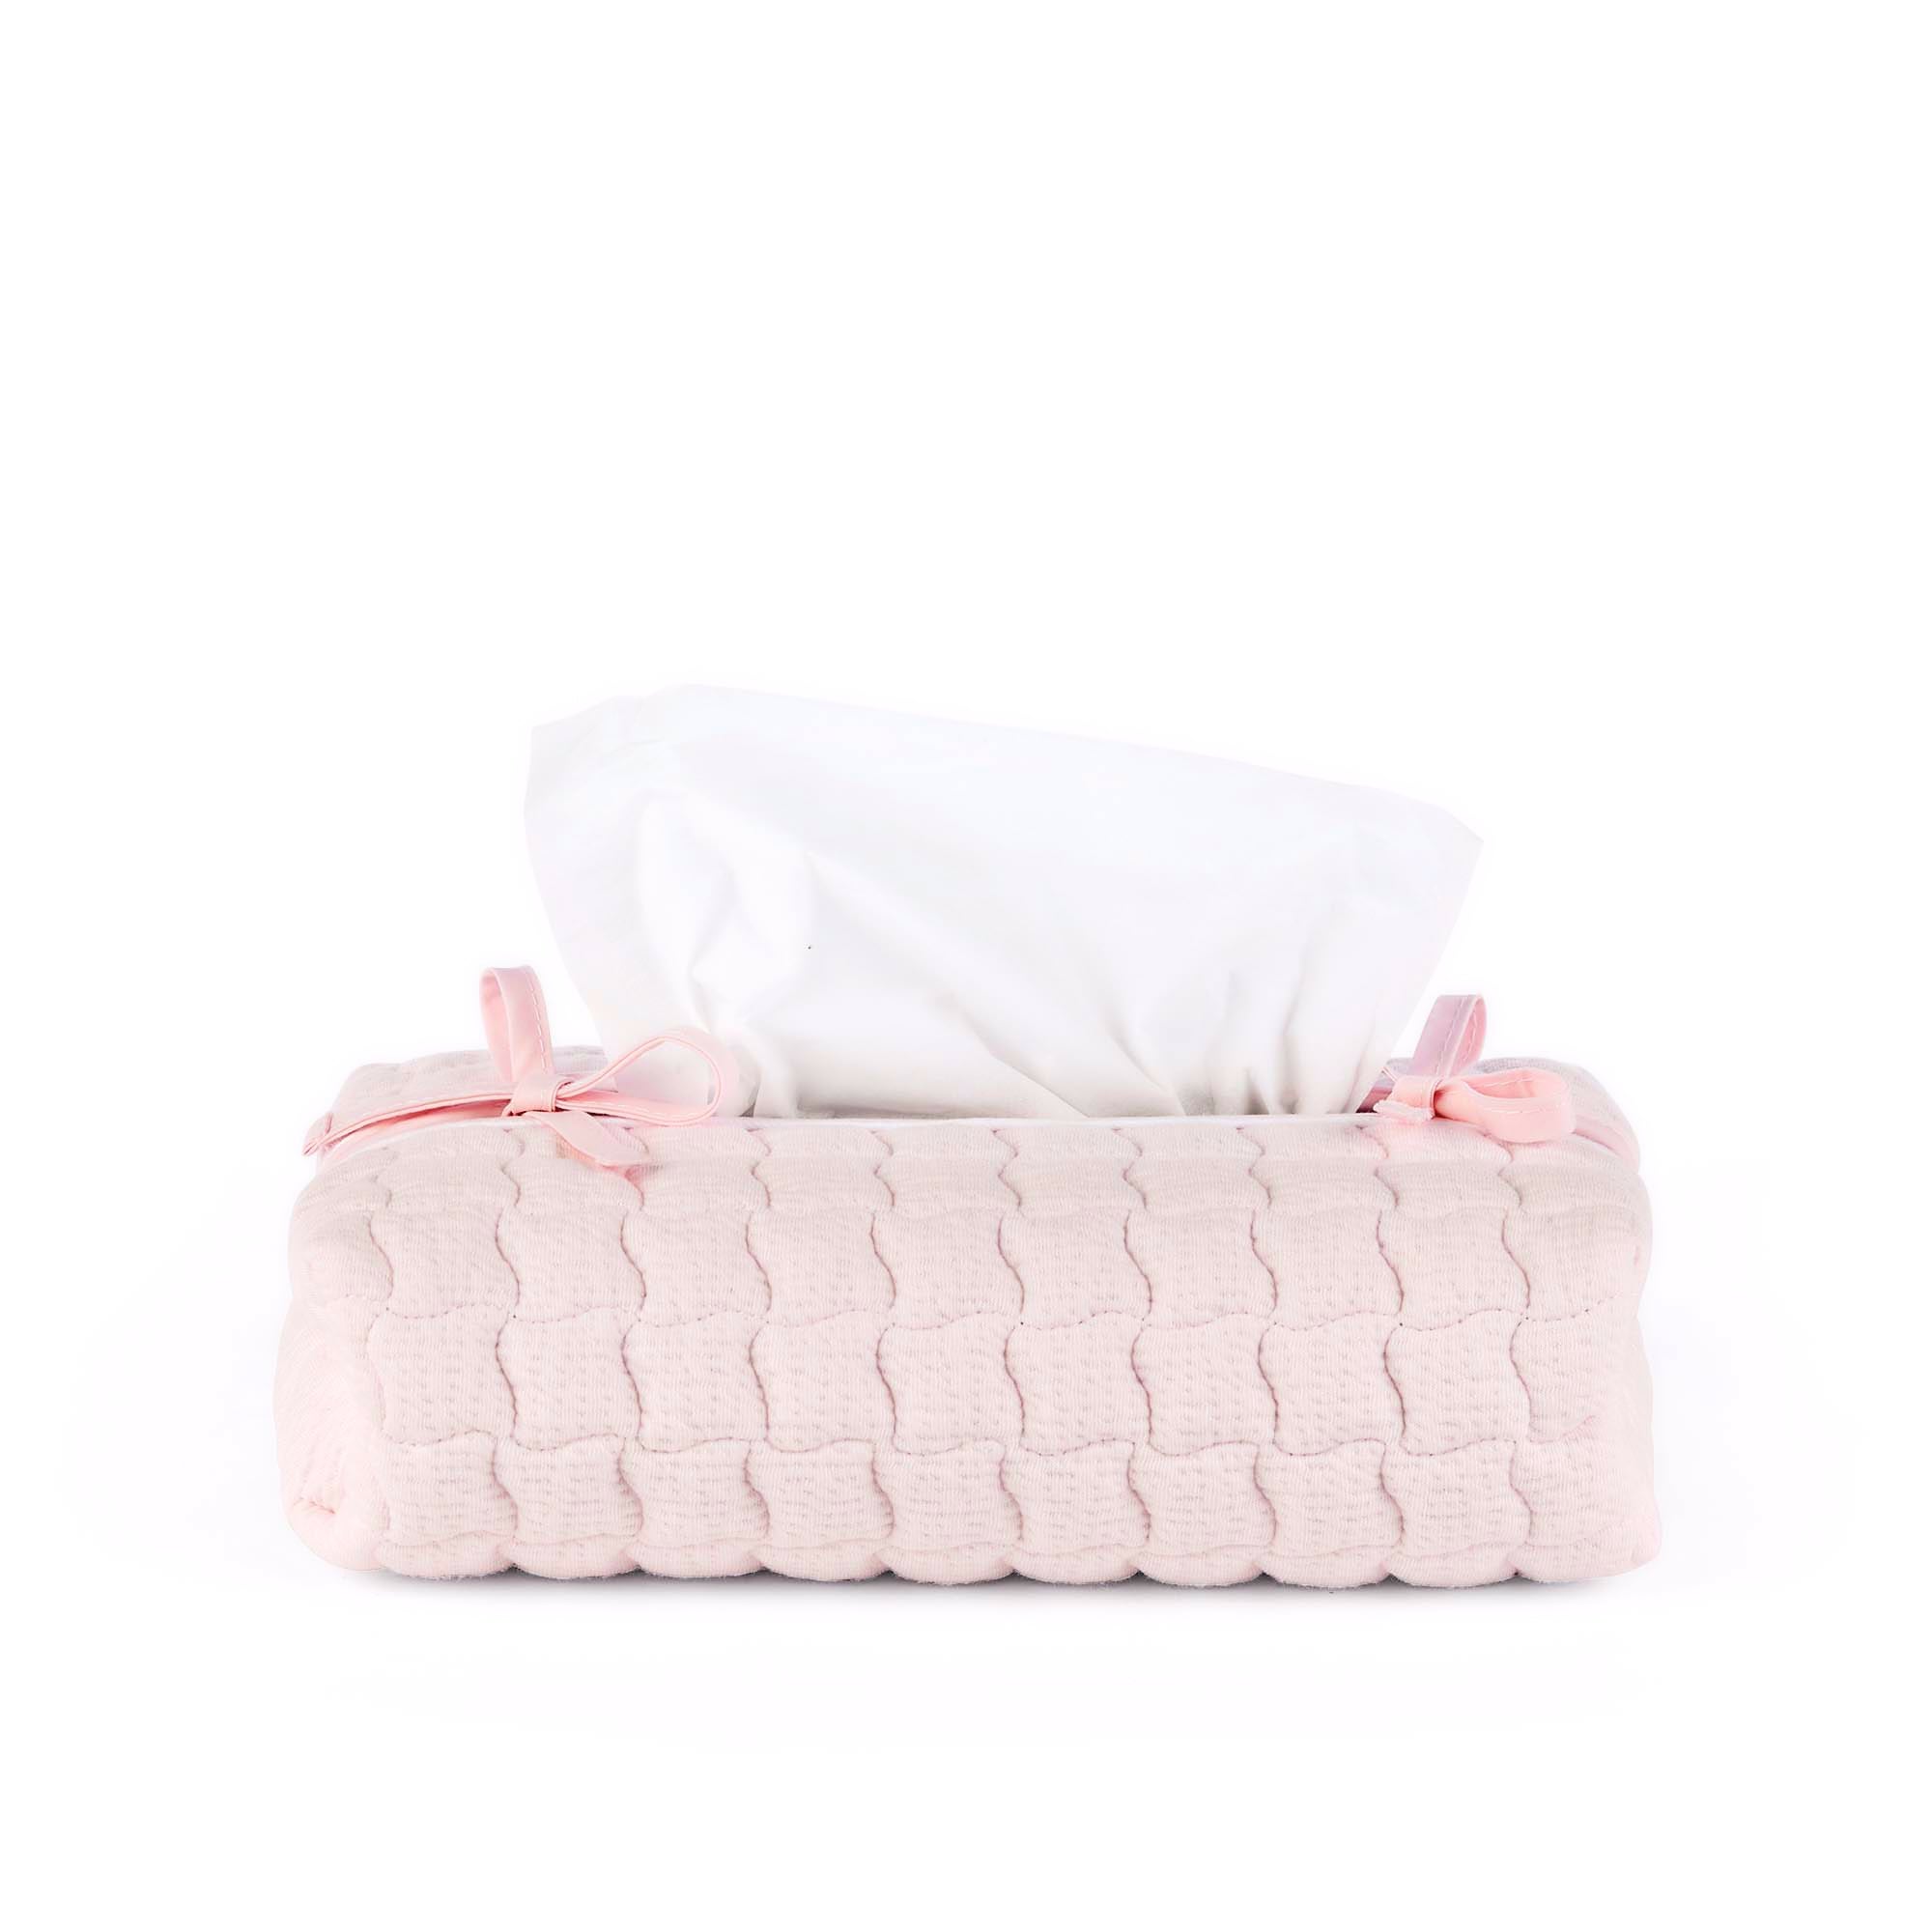 Theophile & Patachou Tissue Cover - Cotton Pink